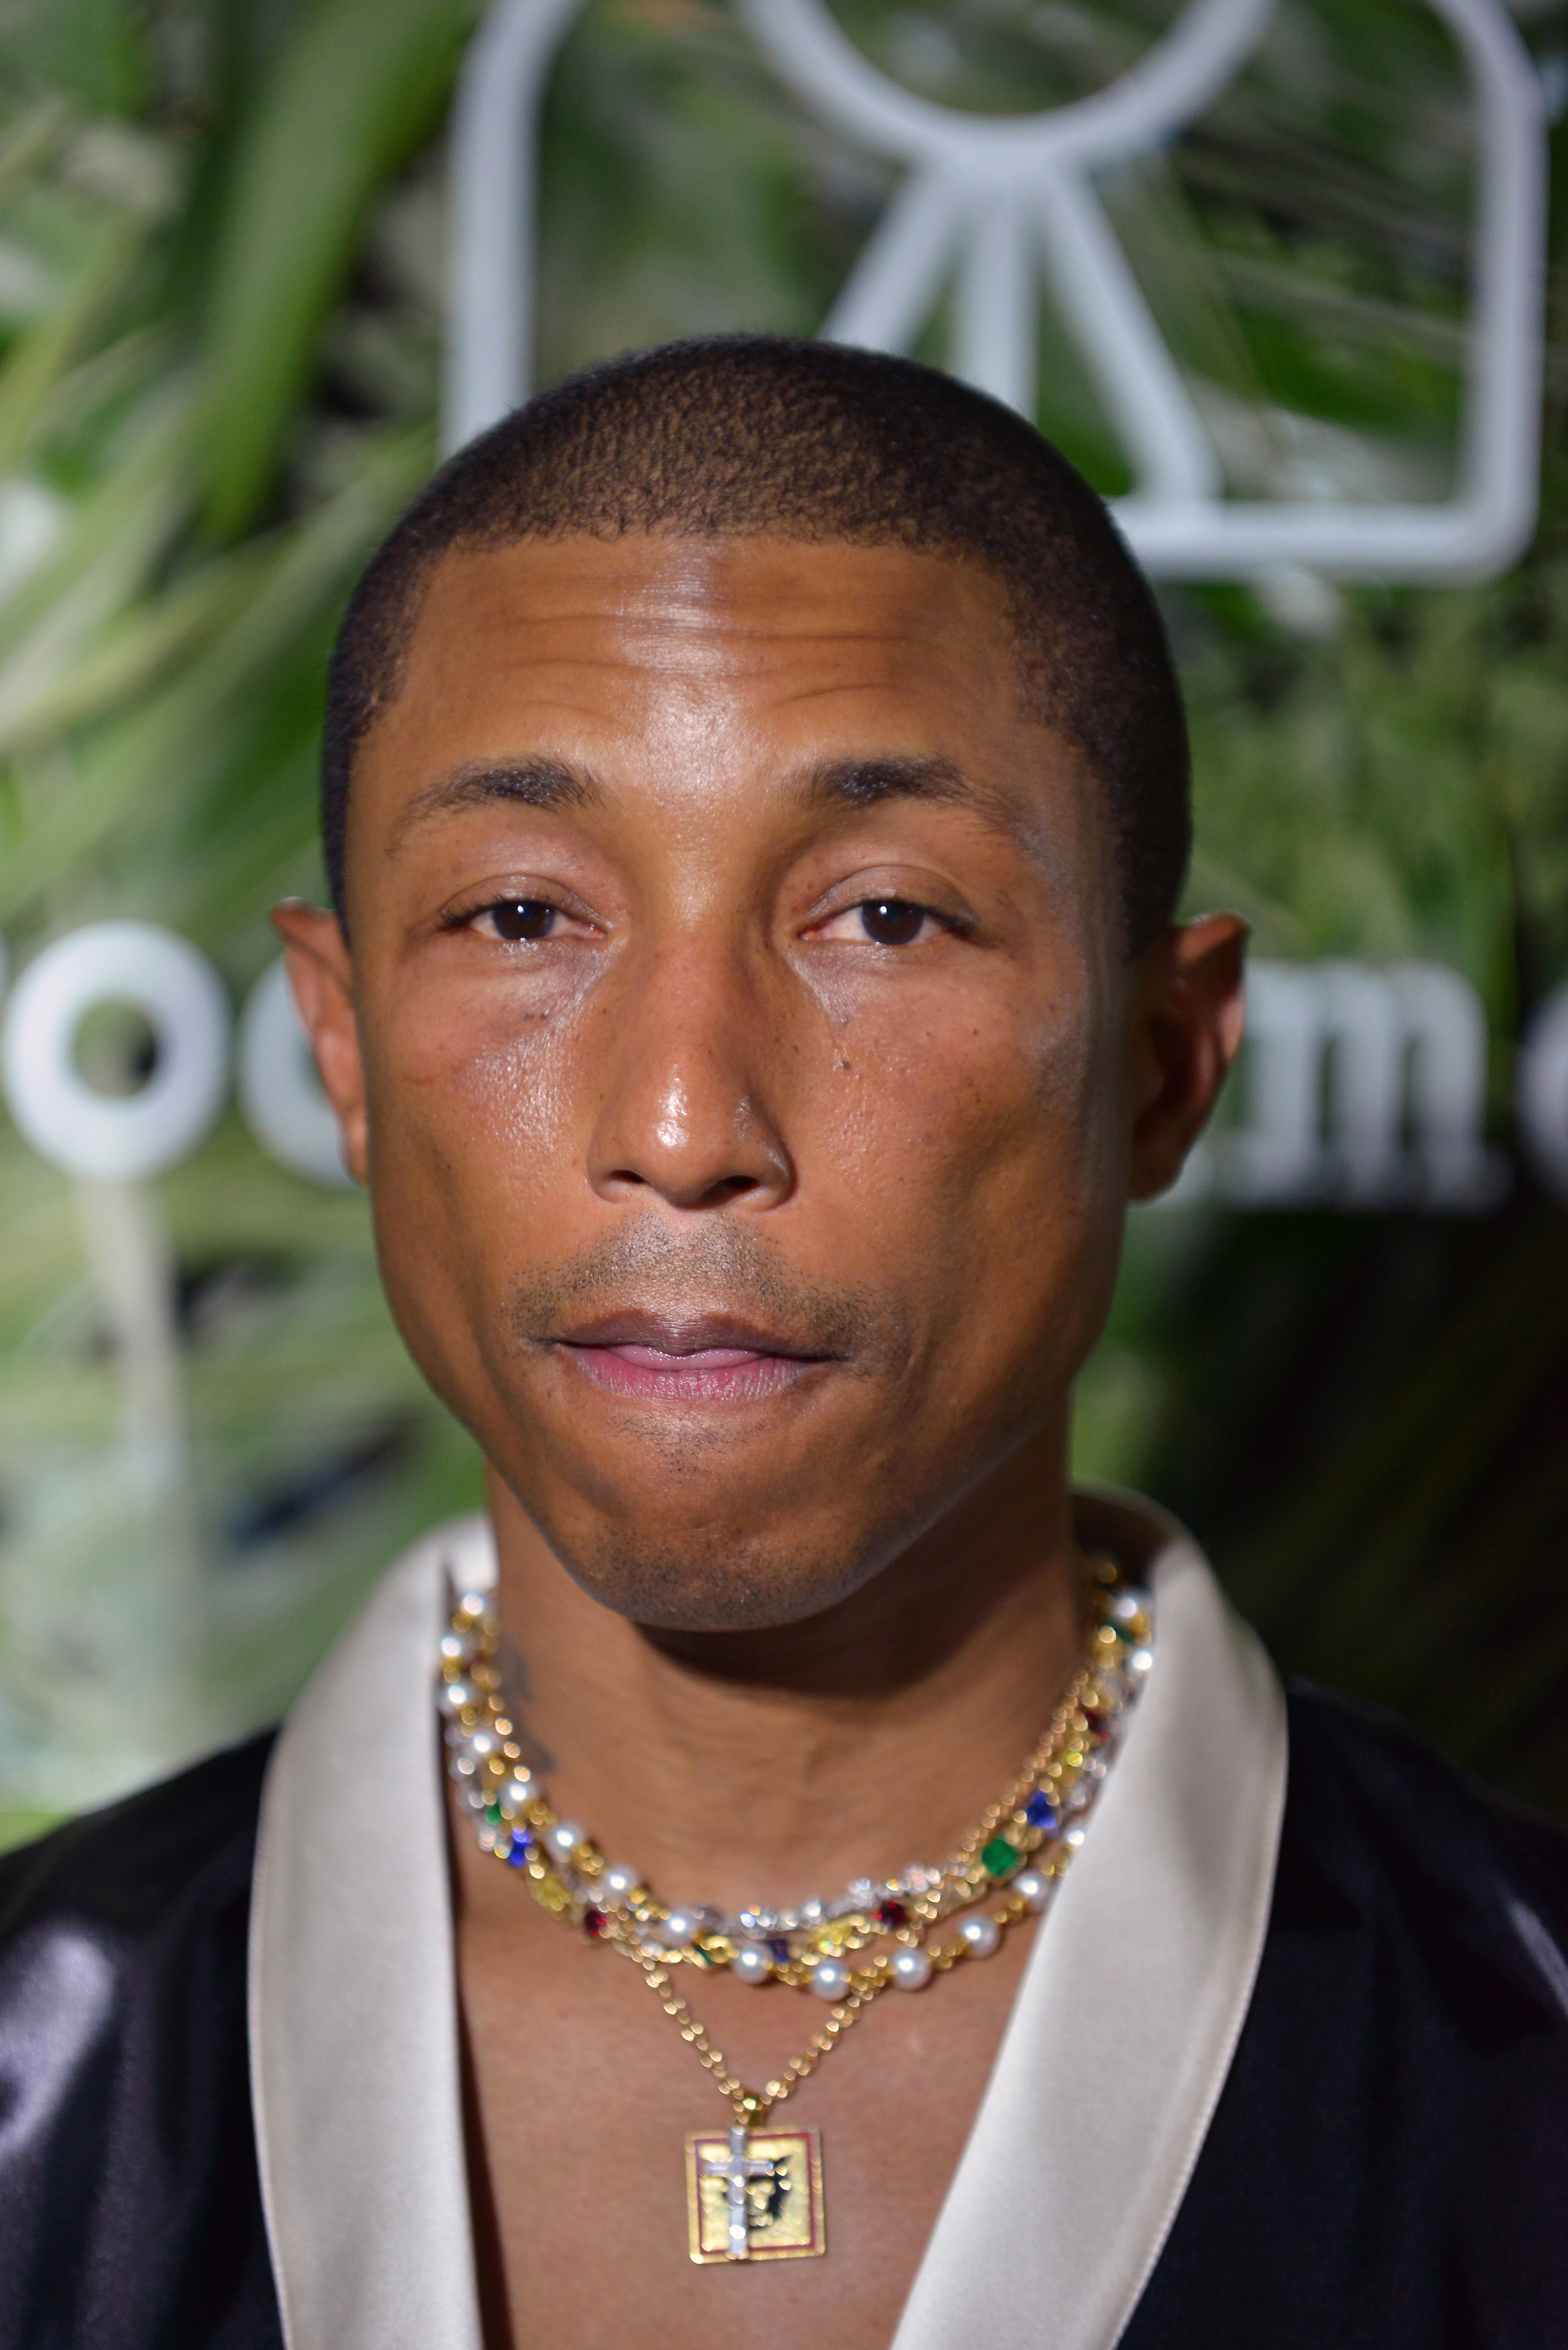 Pharrell Williams attends the Inter Miami CF Season Opening Party Hosted By David Grutman and Pharrell Williams at The Goodtime Hotel on April 16, 2021 in Miami Beach, Florida